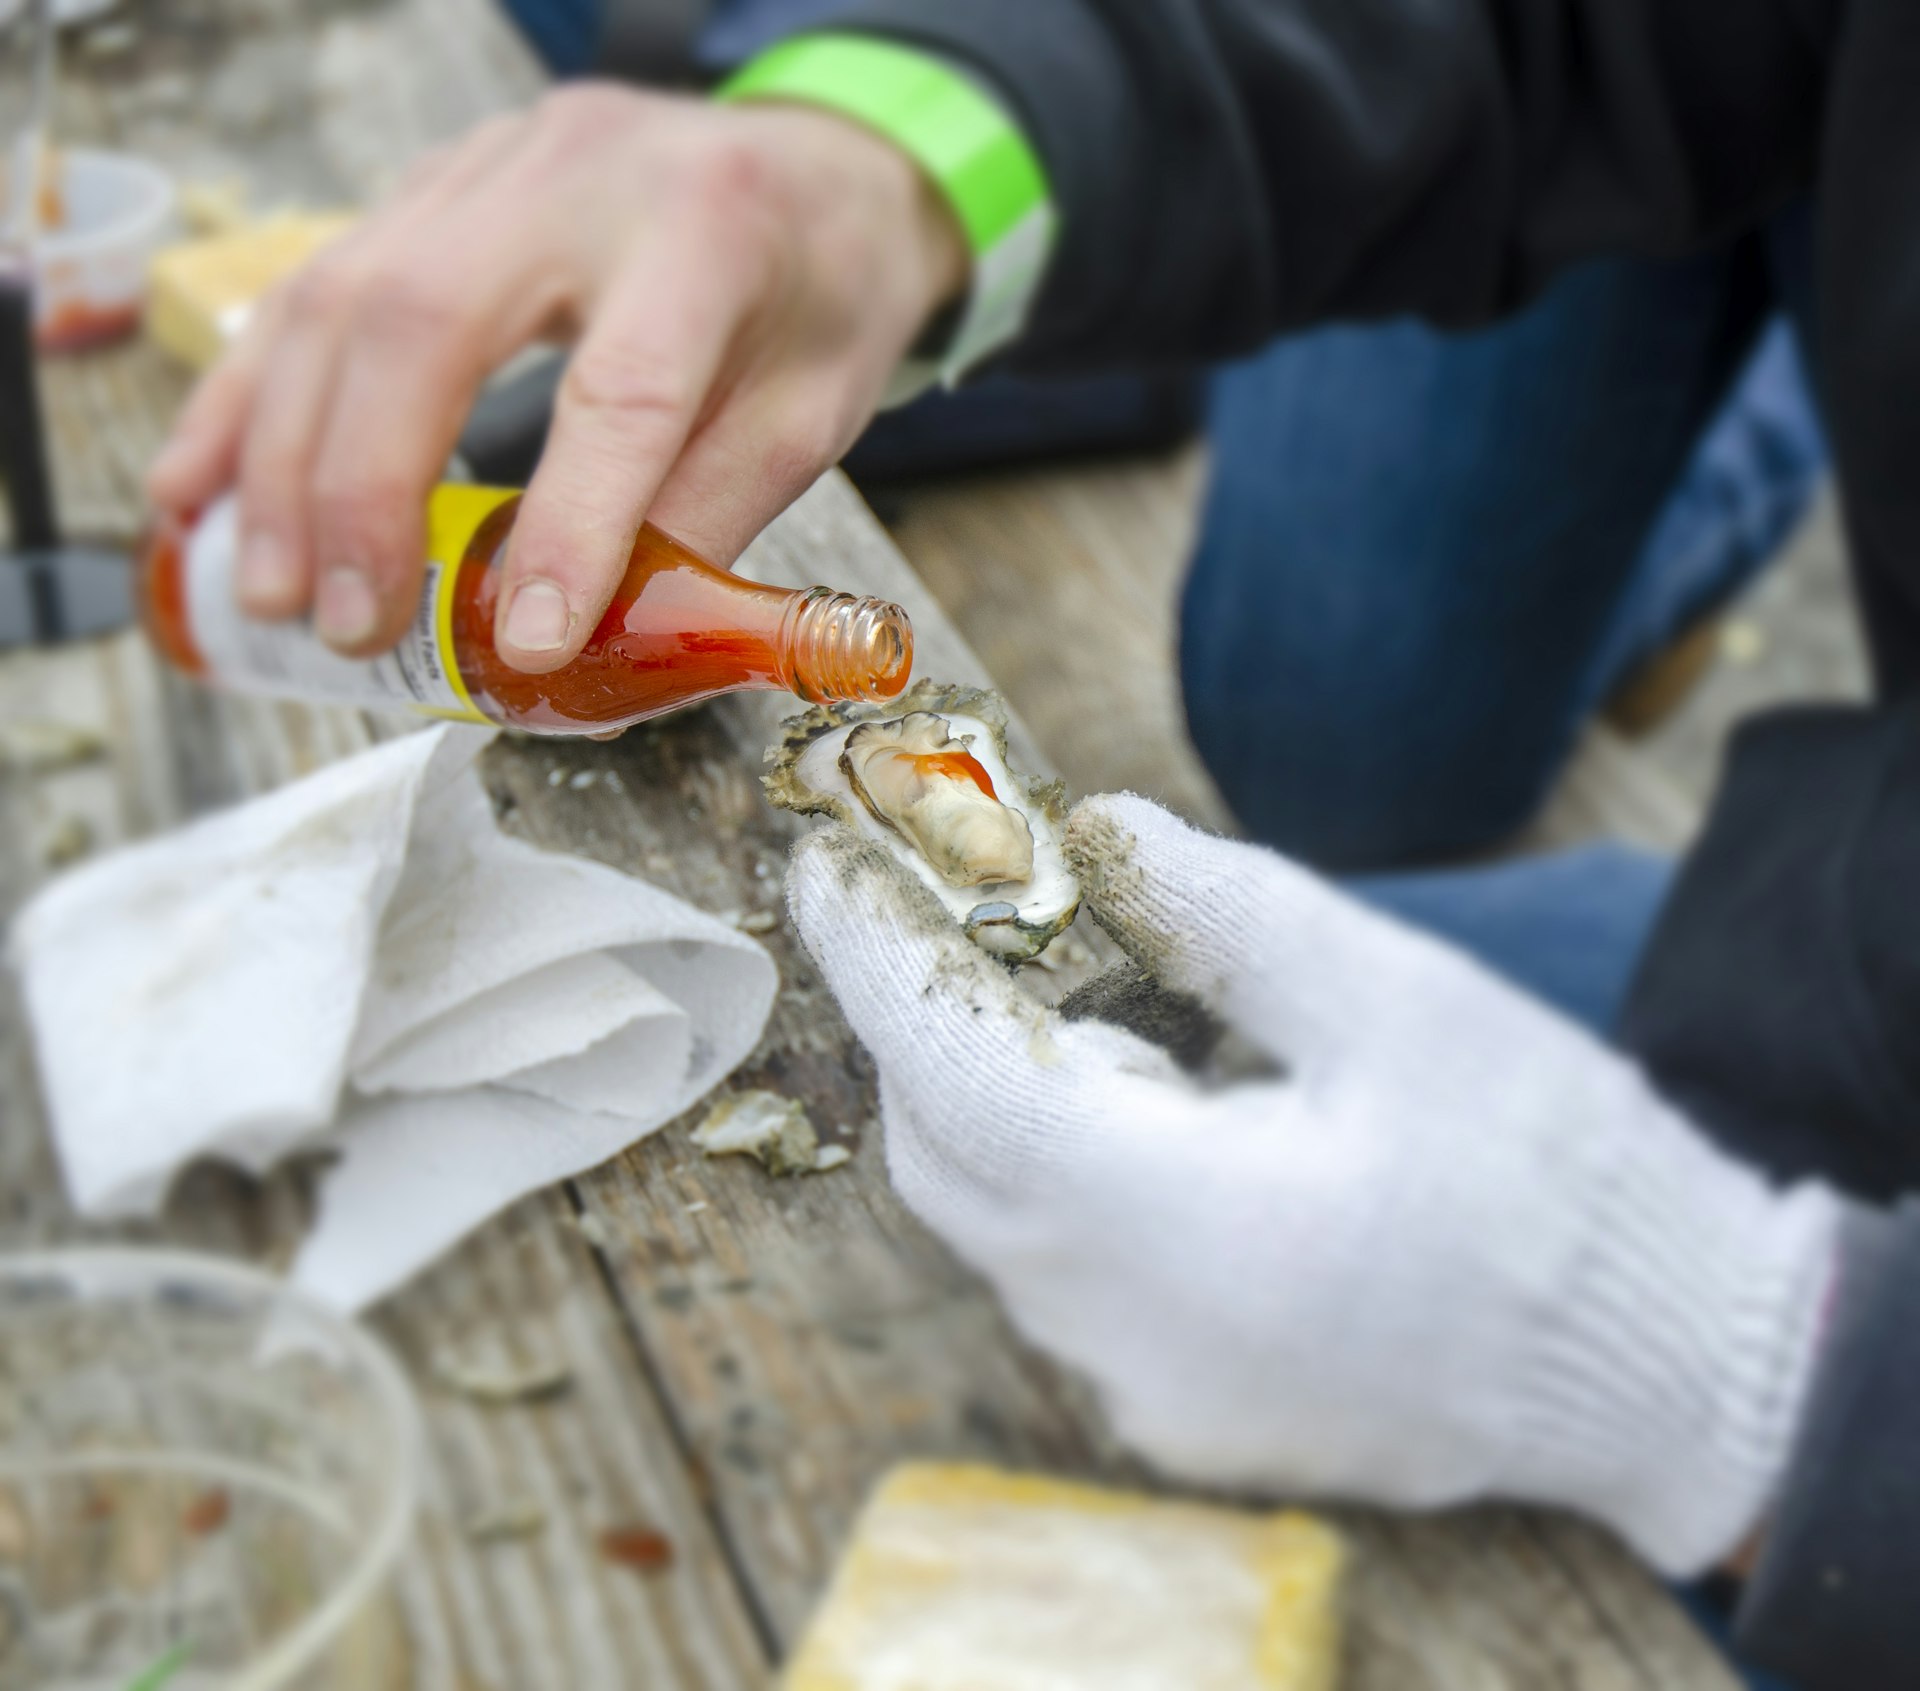 A person holding an oyster pours some hot sauce onto it at the table